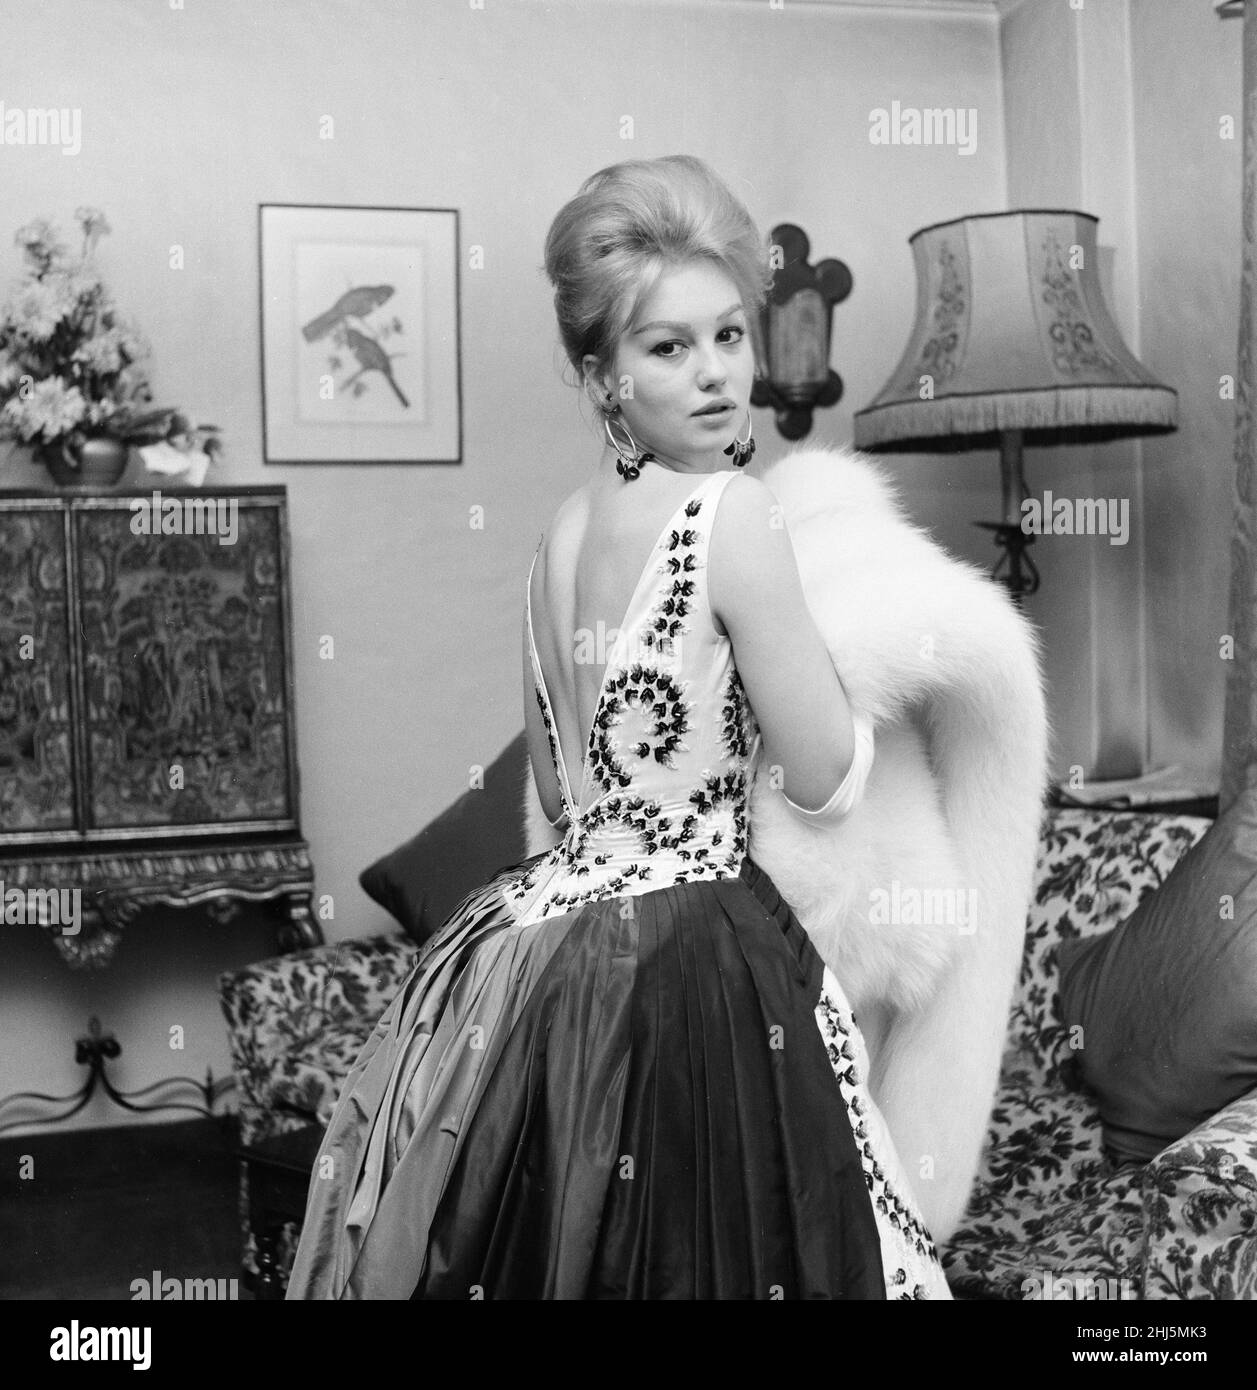 Mylene Demongeot, french actress, gives a preview of the dress she will be wearing at the premier of her new film, The Singer Not the Song, at the Odeon, Leicester Square tomorrow evening, Pictured in her room at The Dorchester Hotel, London, Wednesday 4th January 1961. Mylene Demongeot is wearing a full length full skirt dress of white satin and embroidered with black and white sequins in a leaf pattern, with a big sash of black satin that ties in a bow at the waist, completed with a white fox stole. Stock Photo